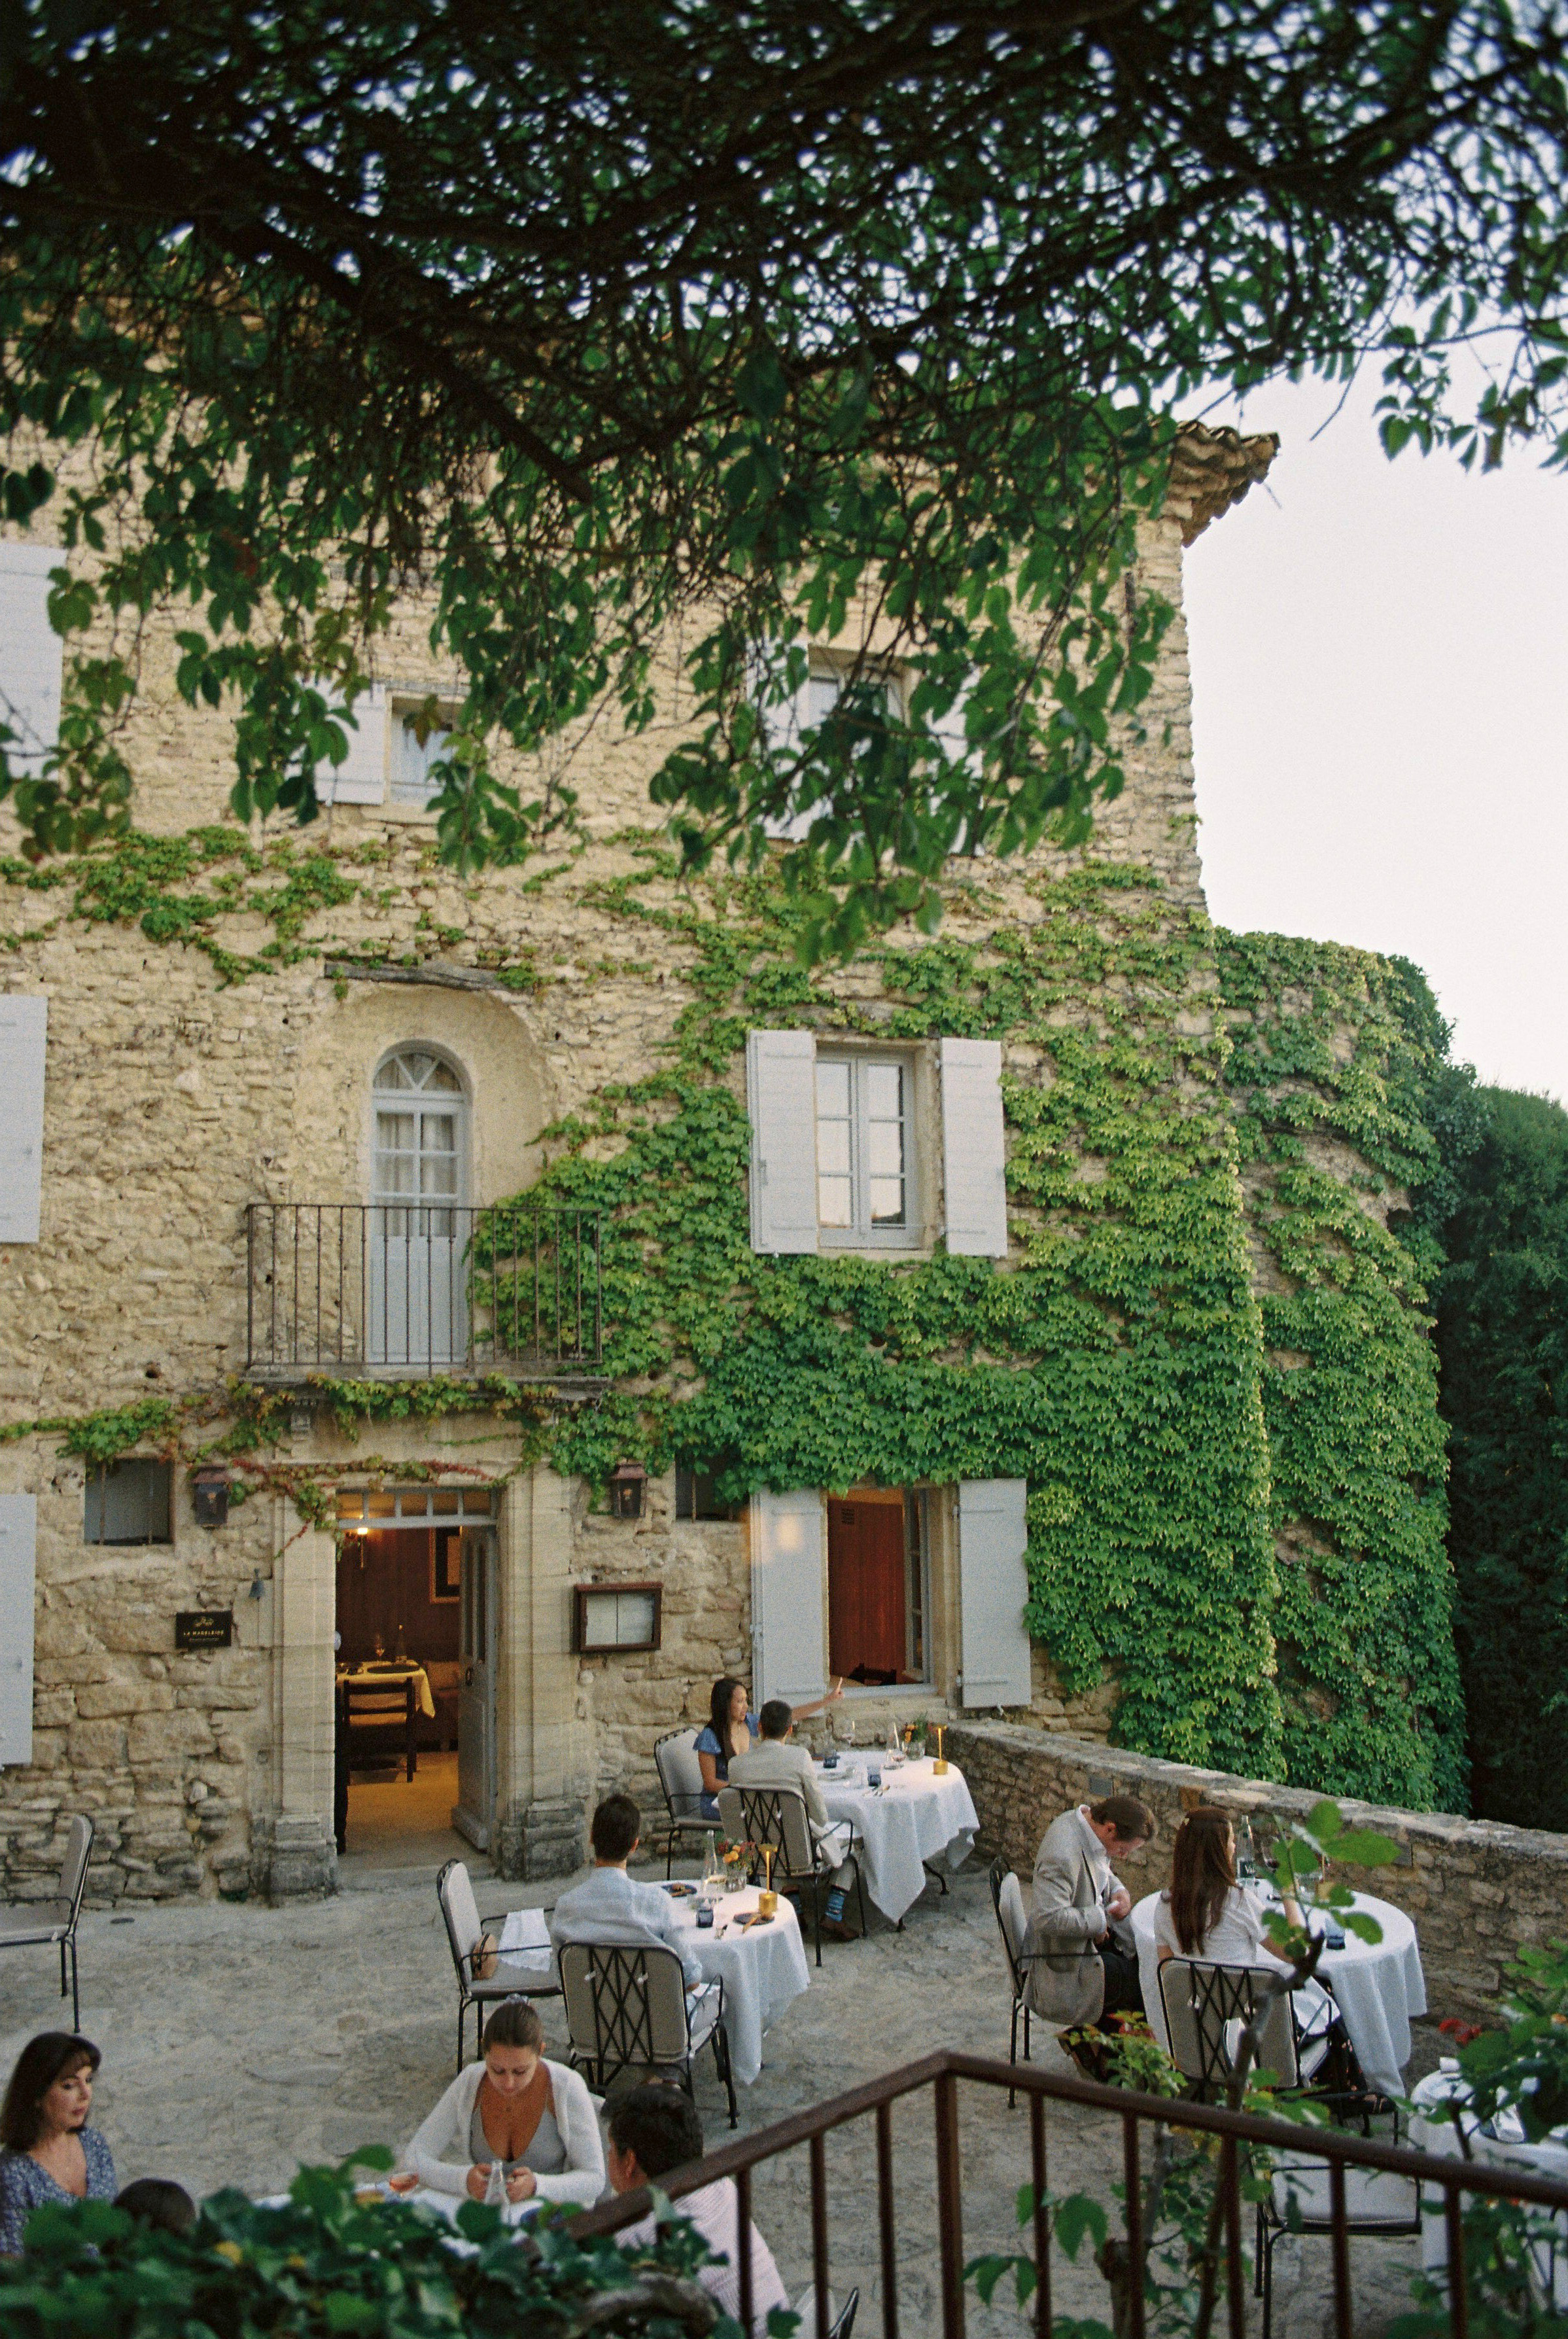 Hotel Crillon Le Brave, one of the prettiest places to stay in the South of France  /Photo Credit Sonia Mota